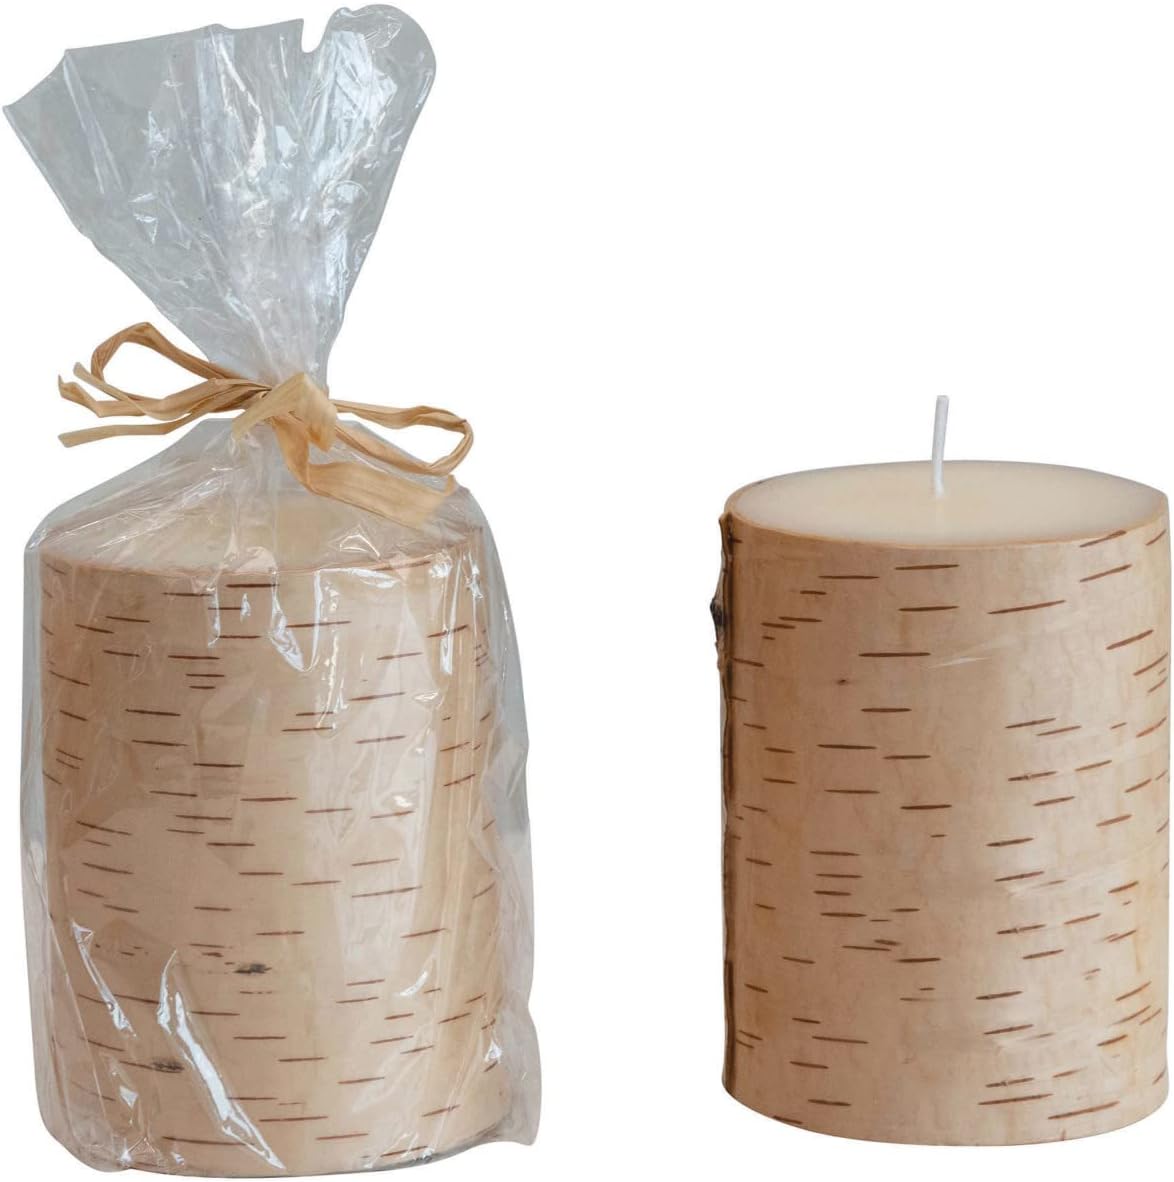 Unscented Birch Wrapped Pillar Candle